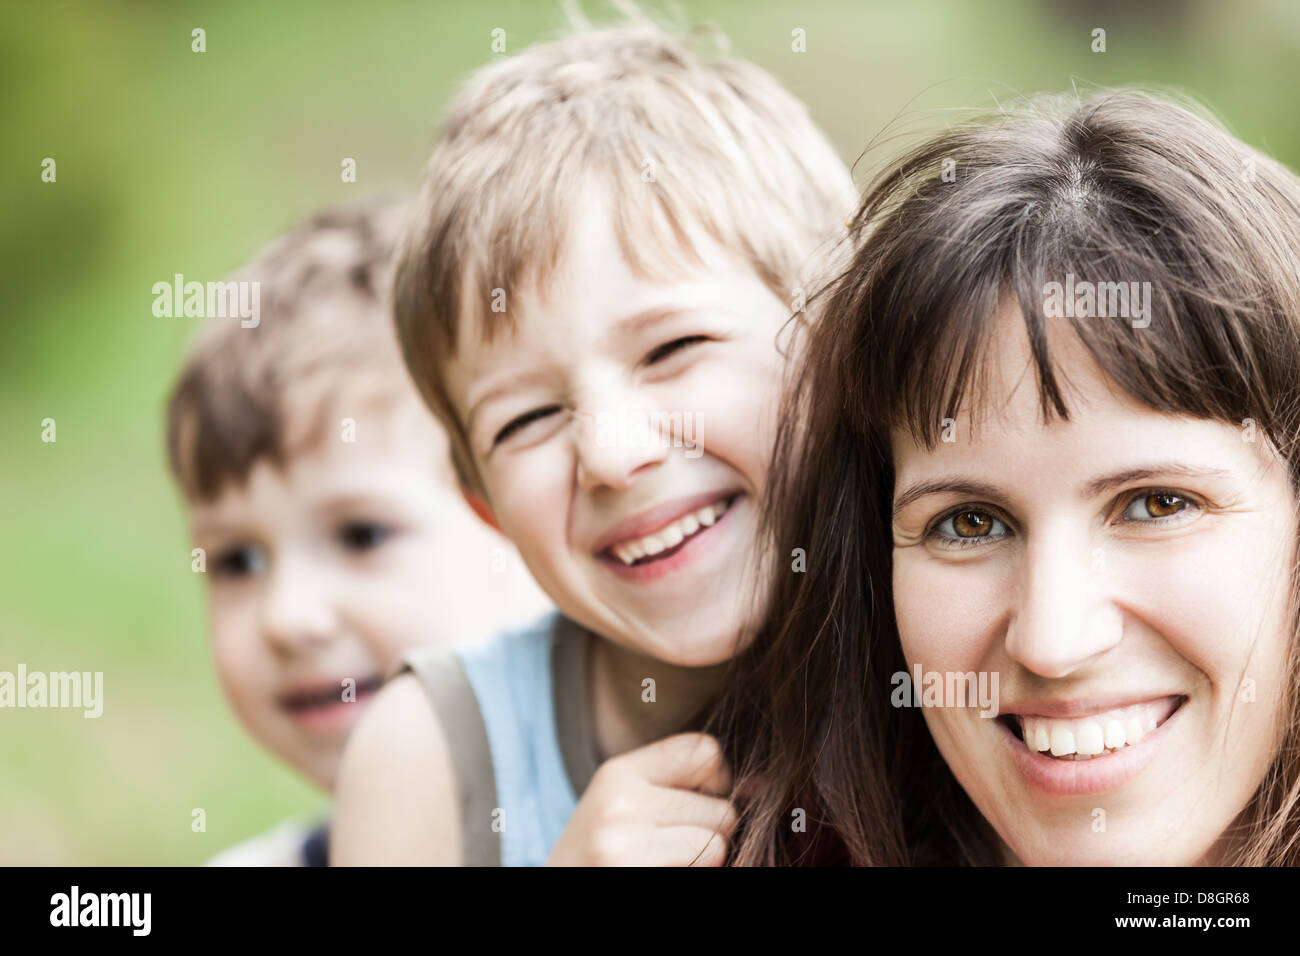 Mother and sons Stock Photo